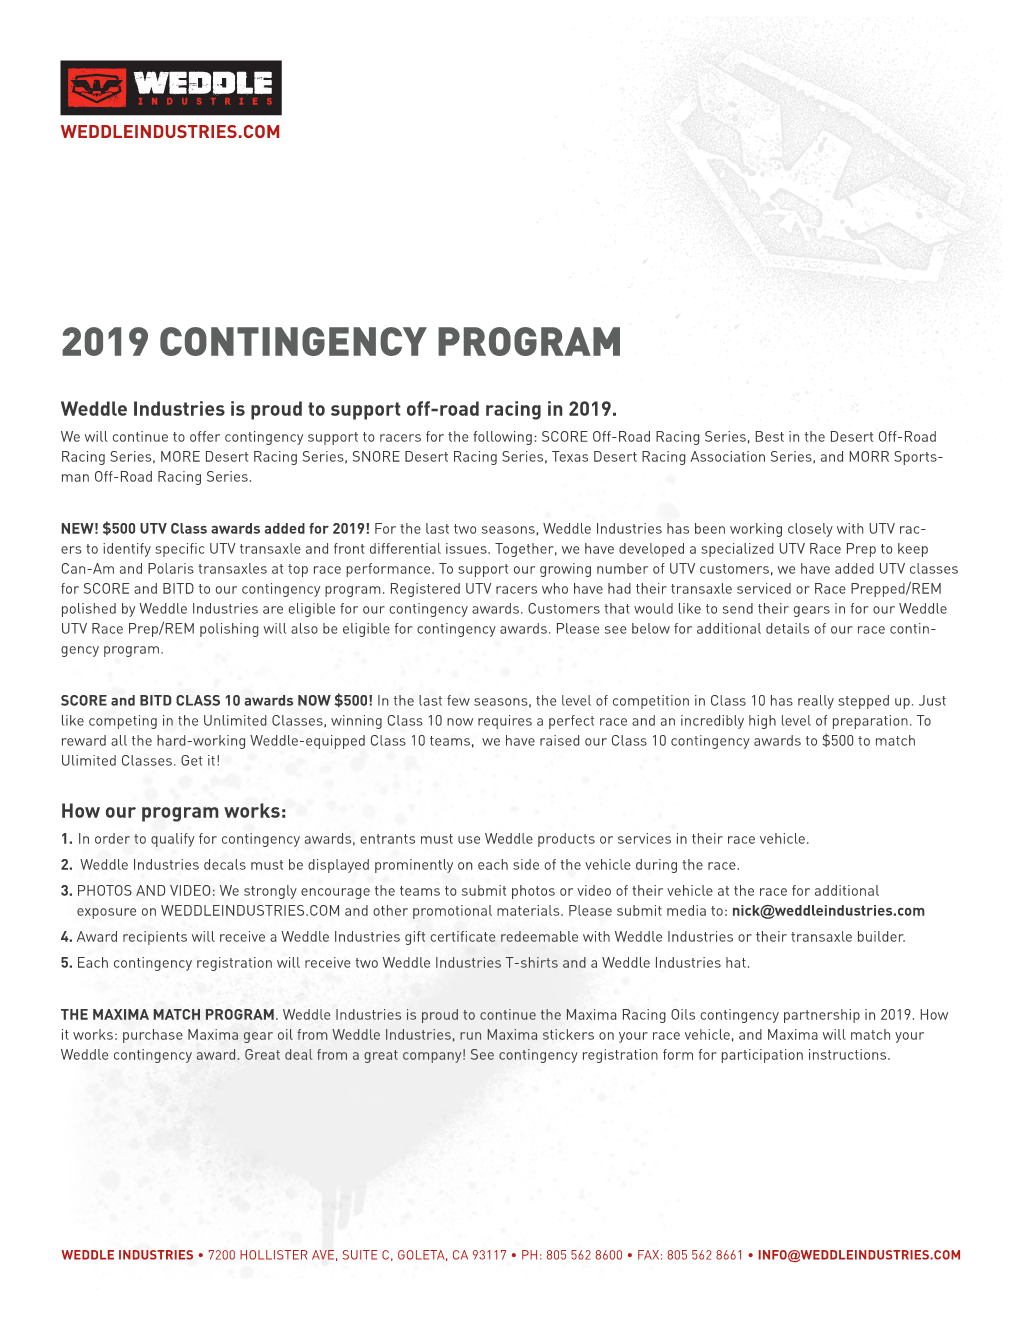 Contingency Registration Form for Participation Instructions